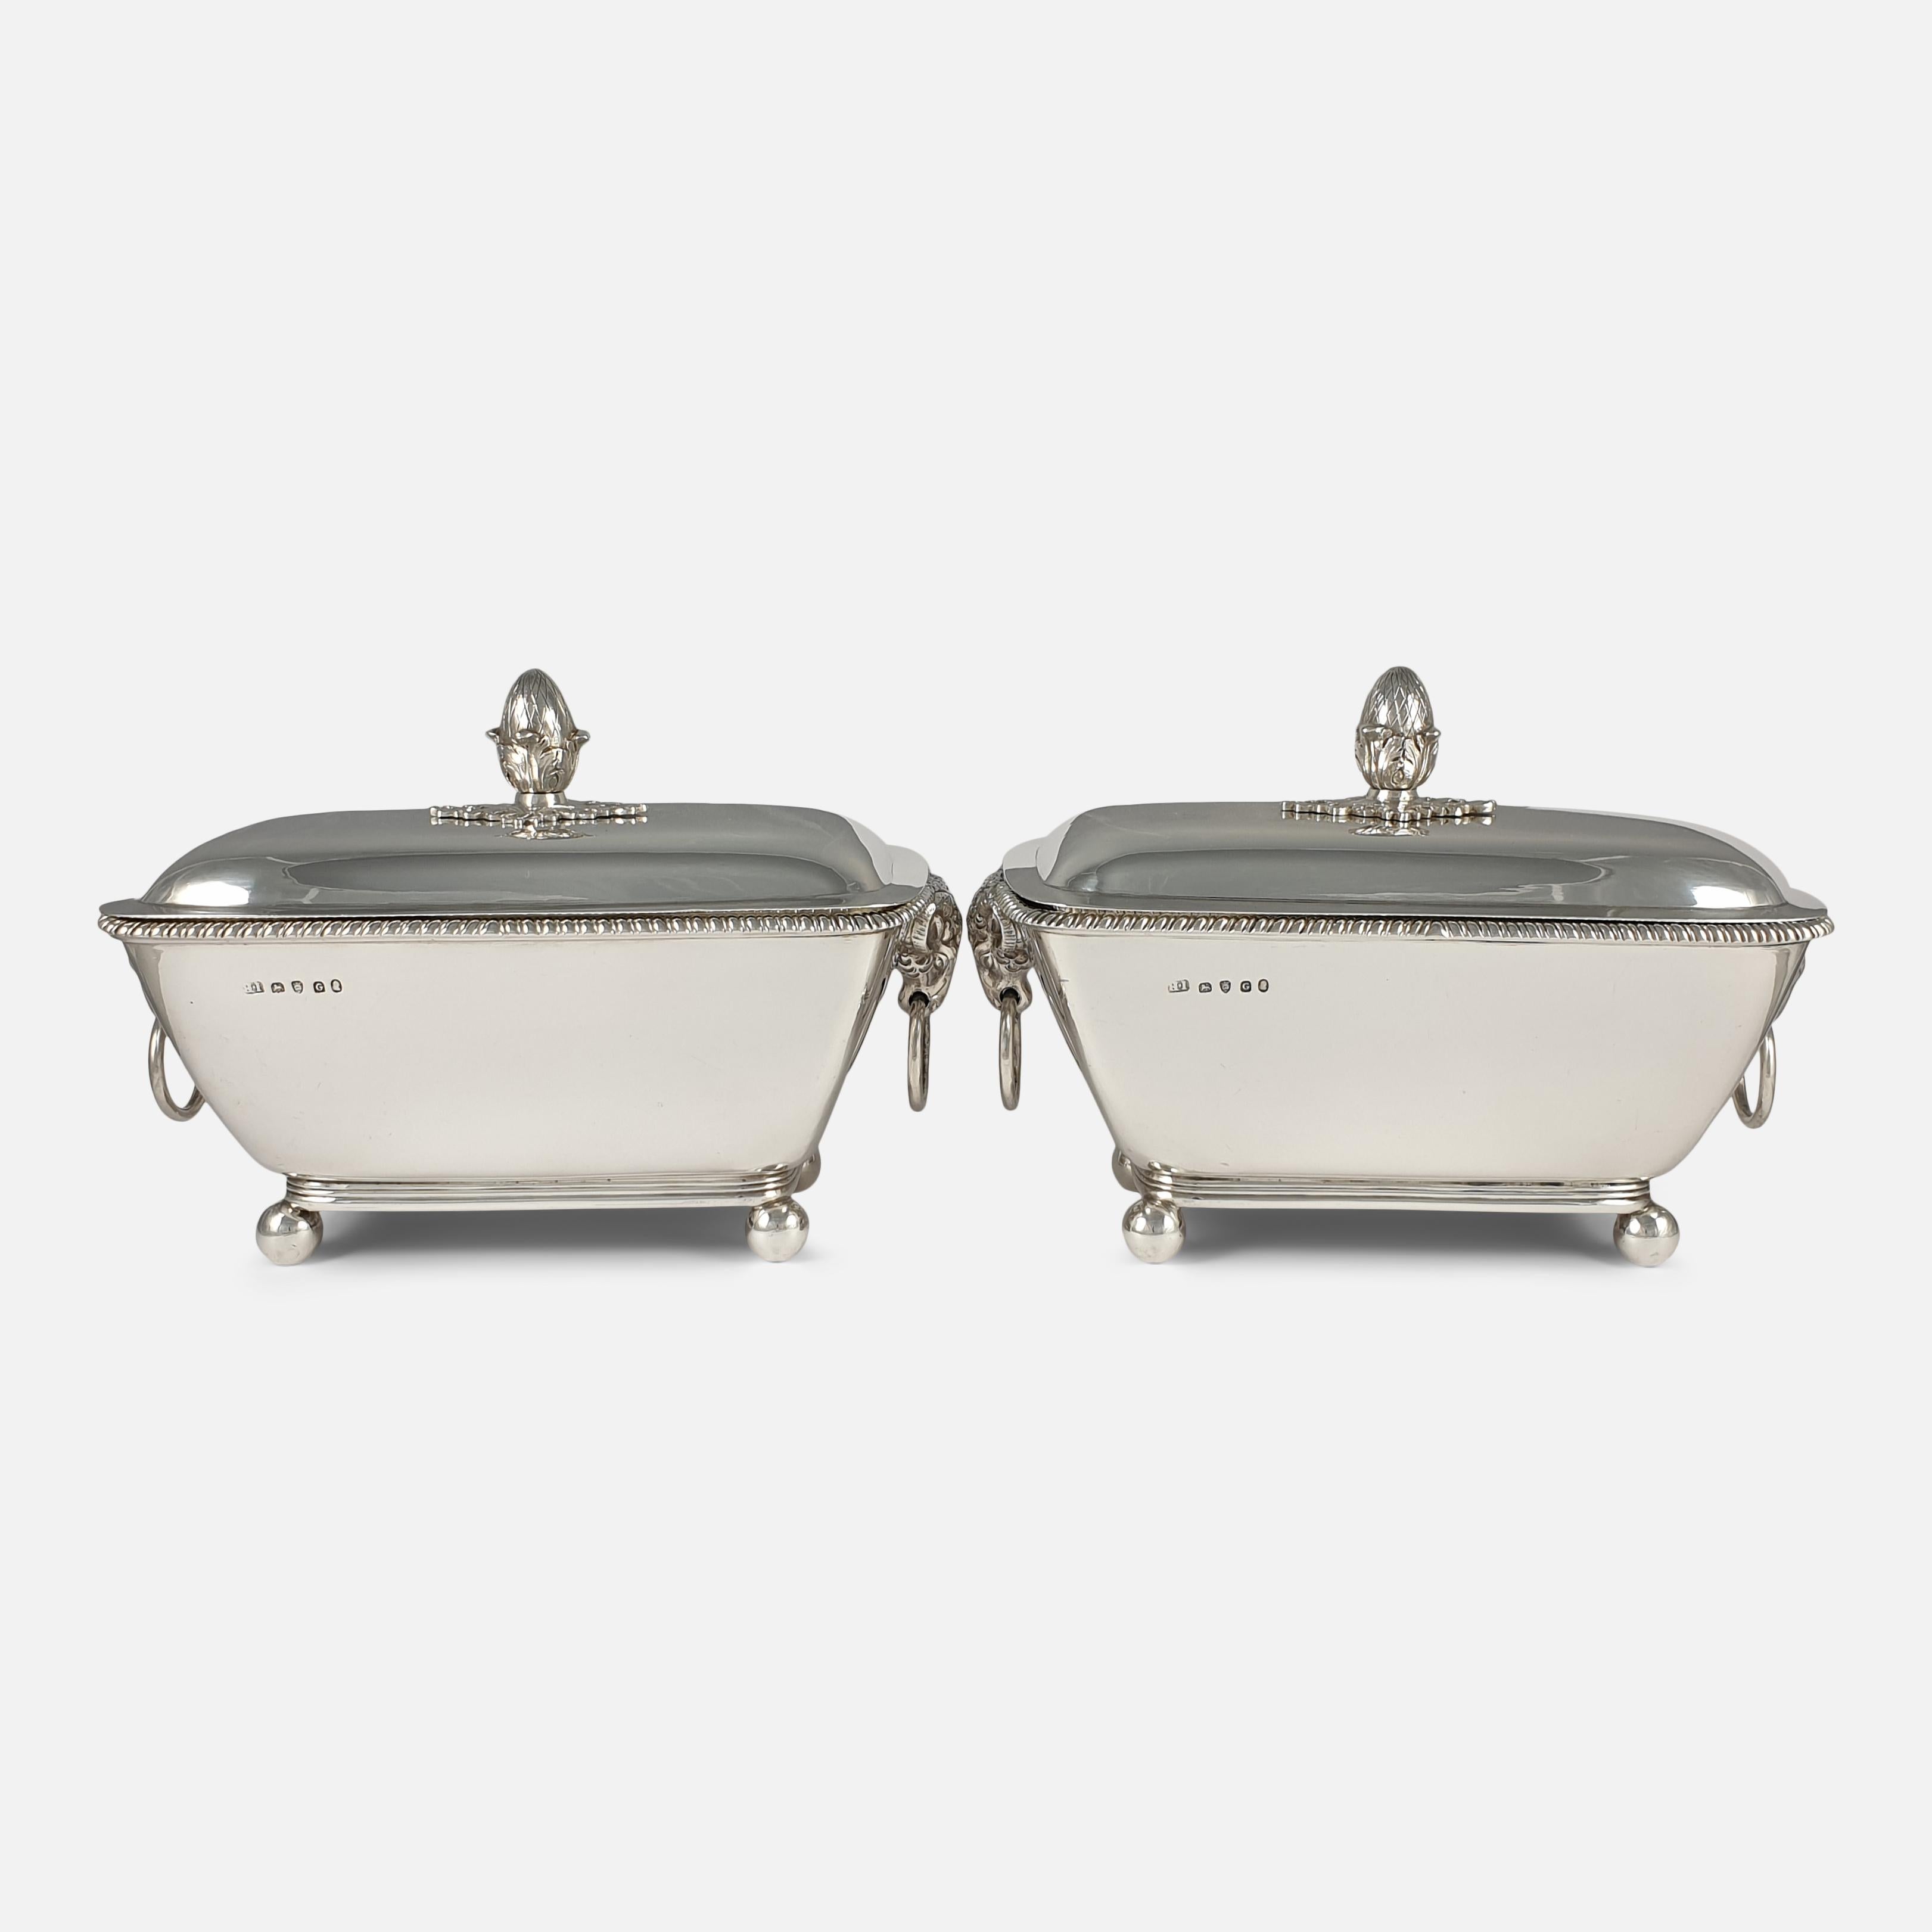 Pair of George III Silver Sauce Tureens and Covers, John Robins, London, 1802 For Sale 6